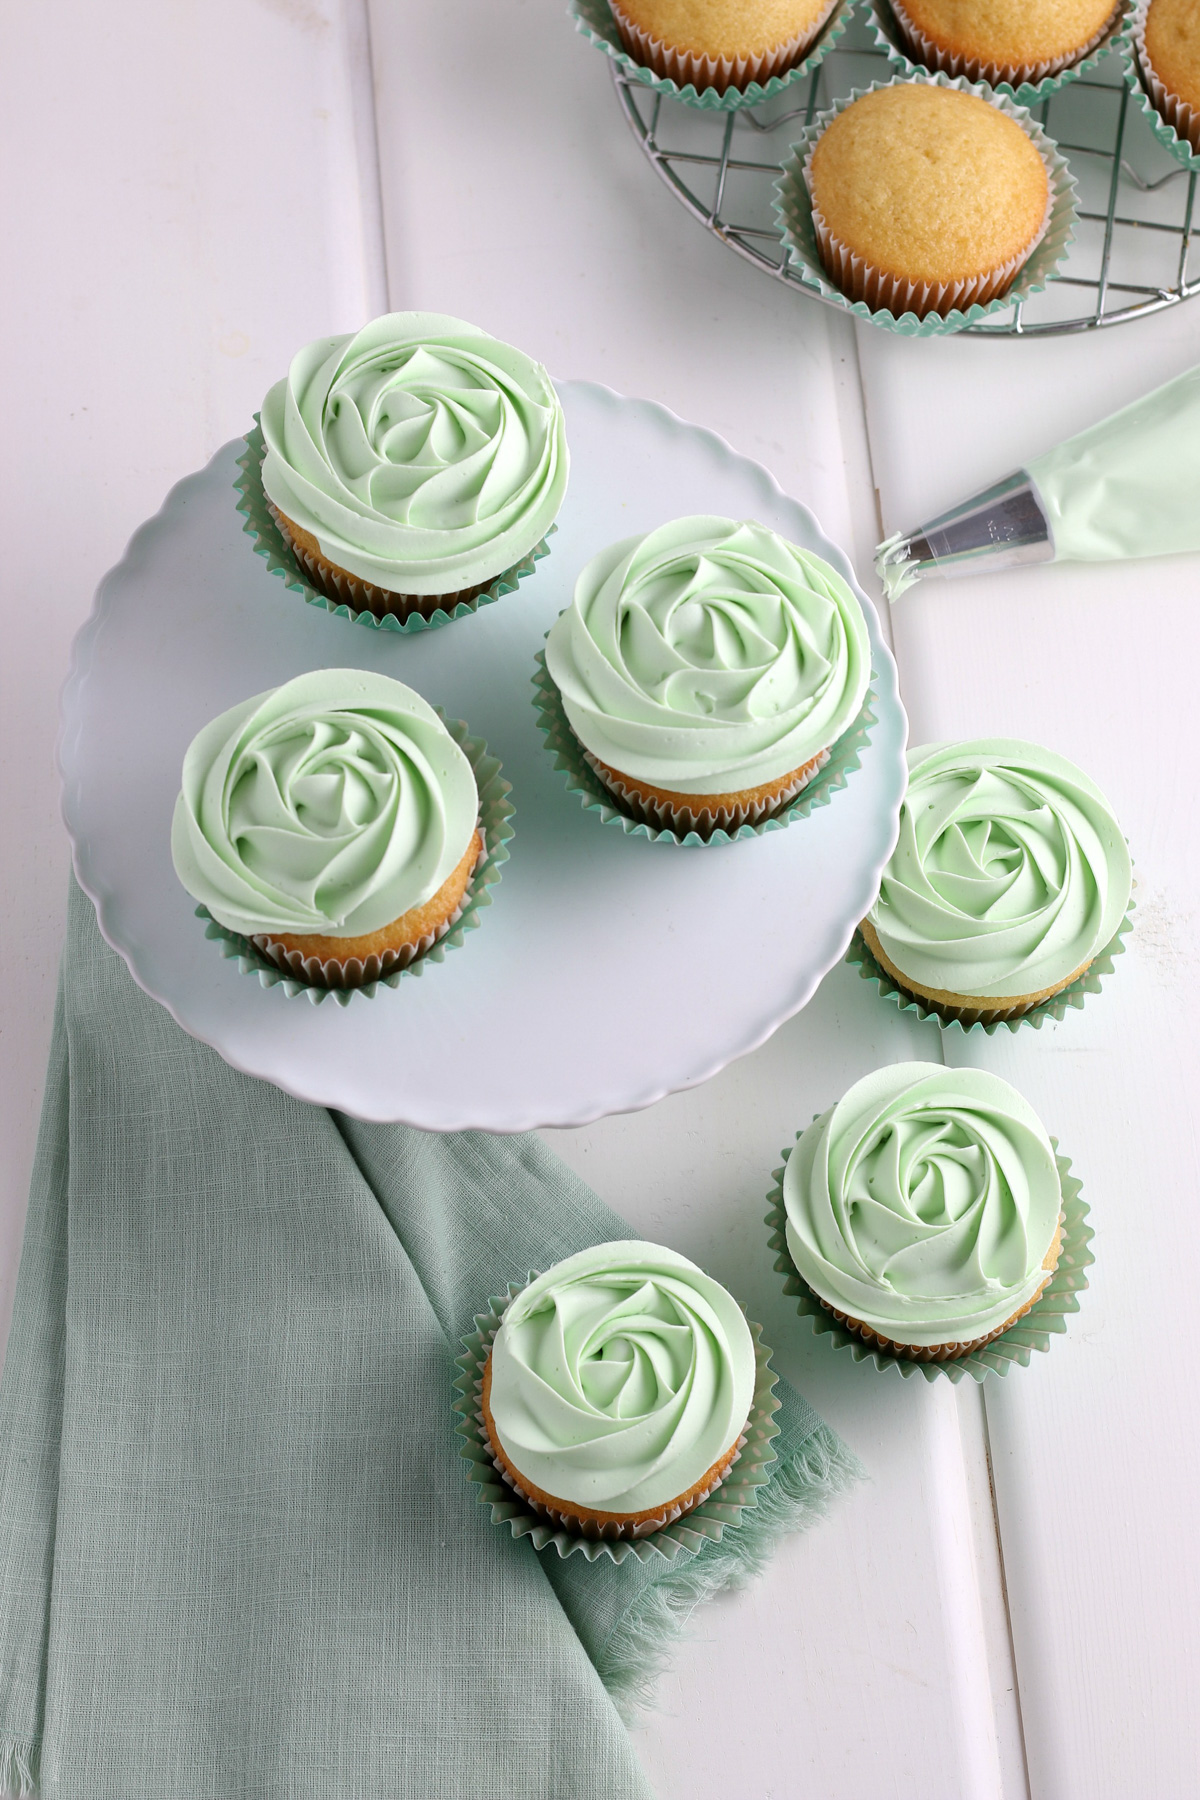 frosting vanilla cupcakes with green buttercream rosettes with pastry bag and 1M cake tip